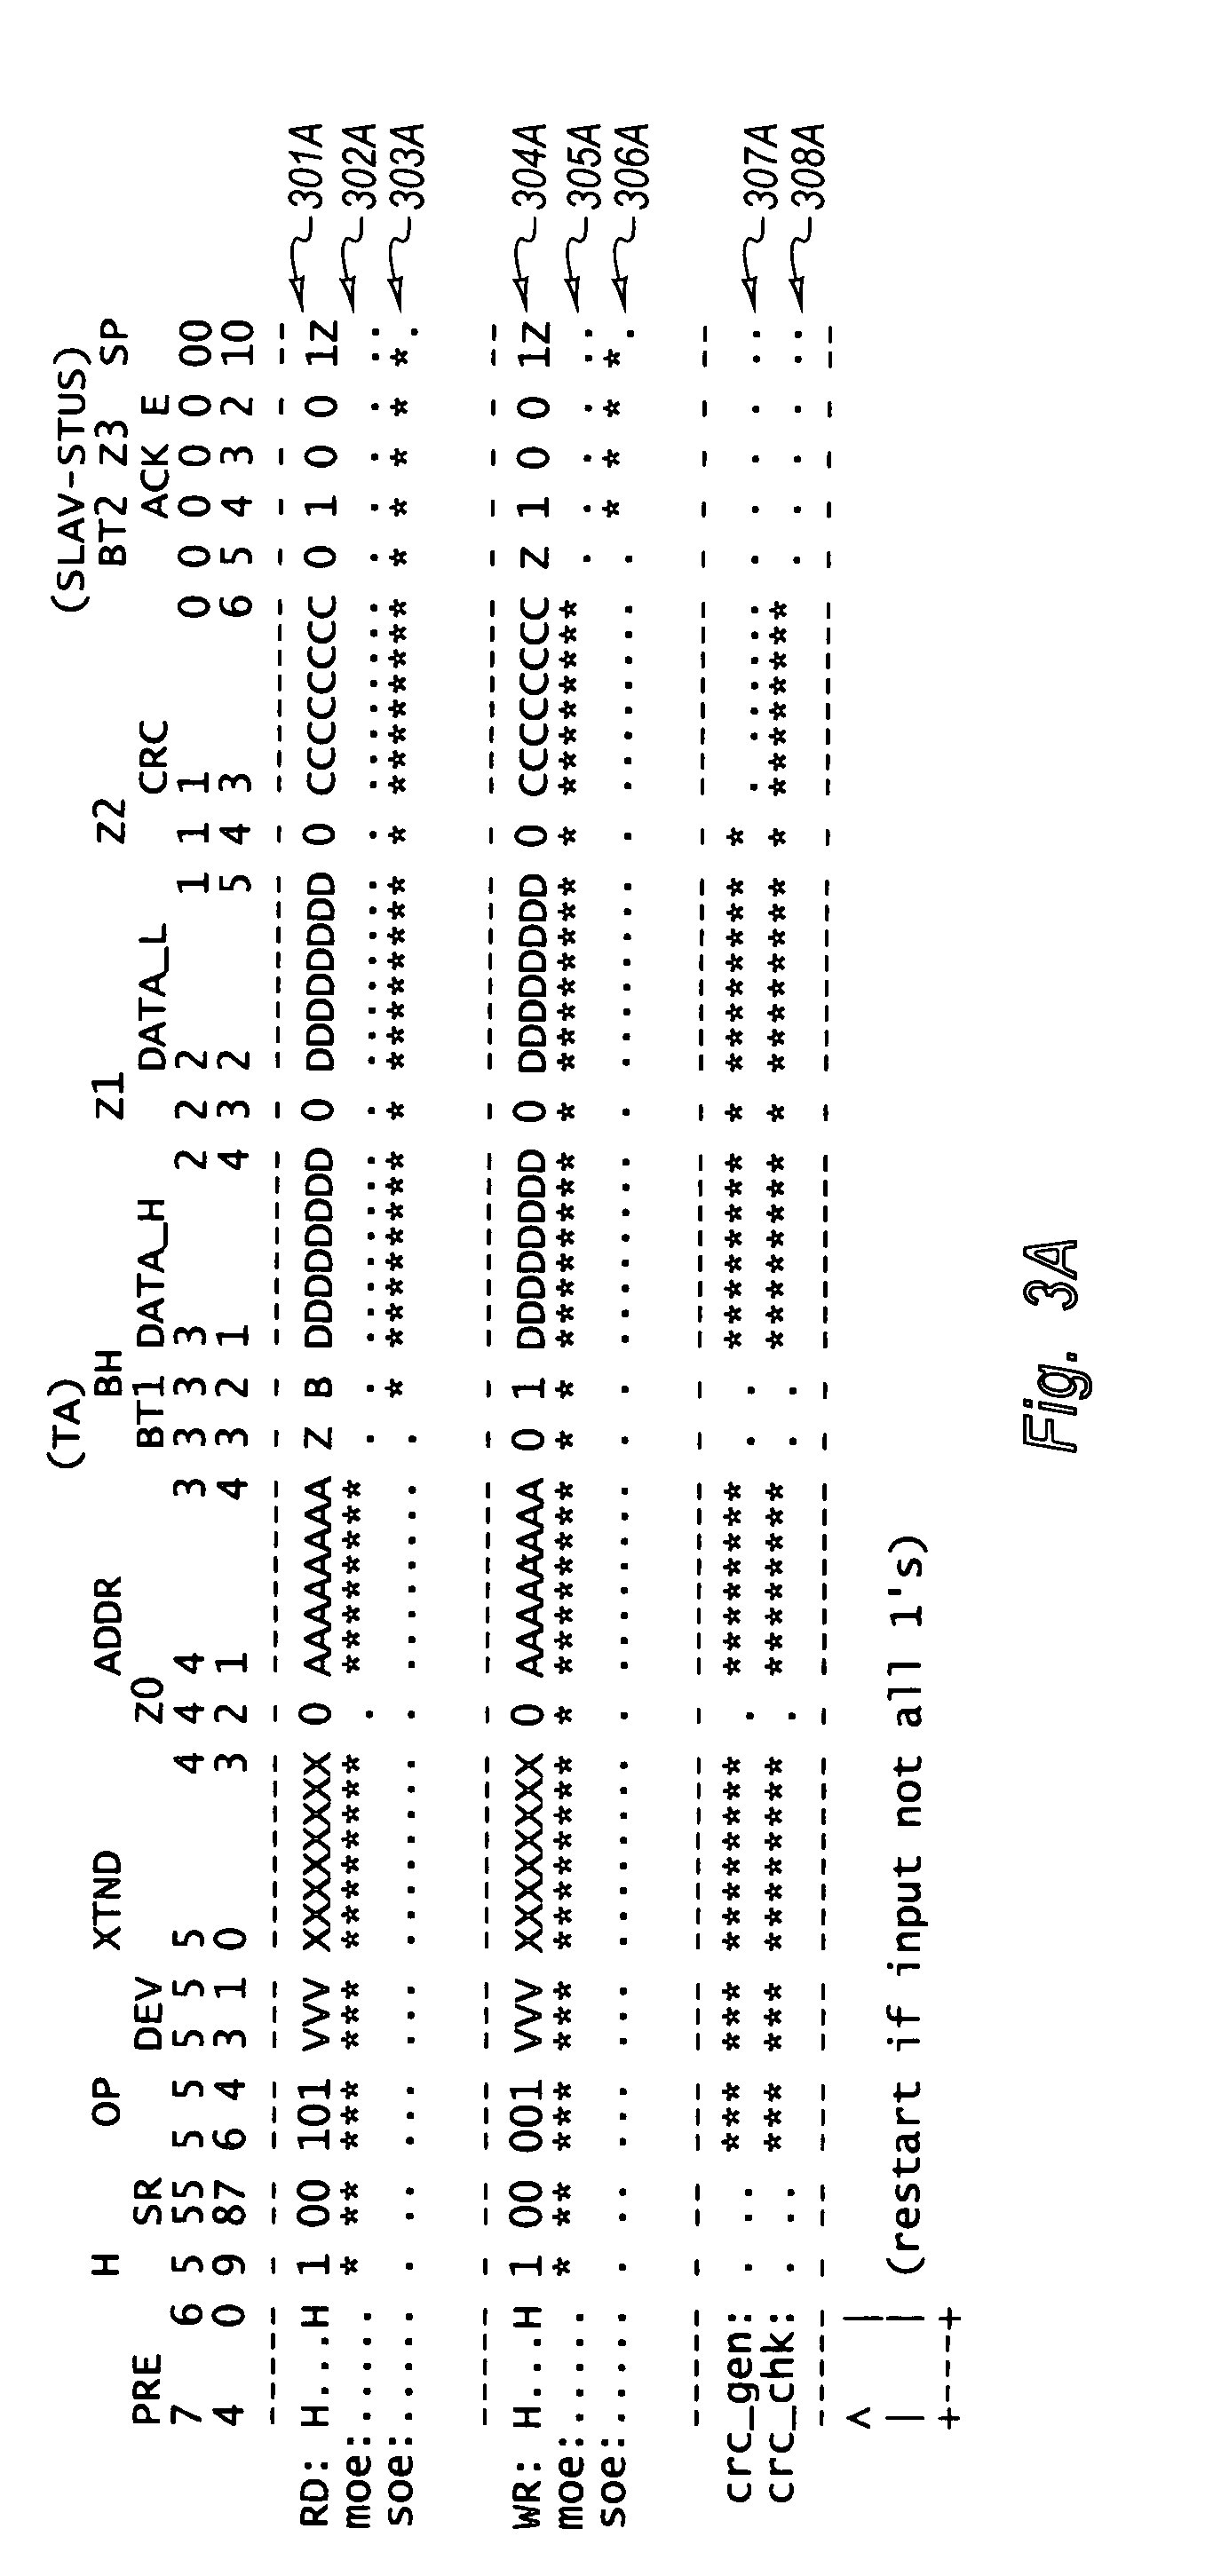 Two-wire interface having dynamically adjustable data fields depending on operation code